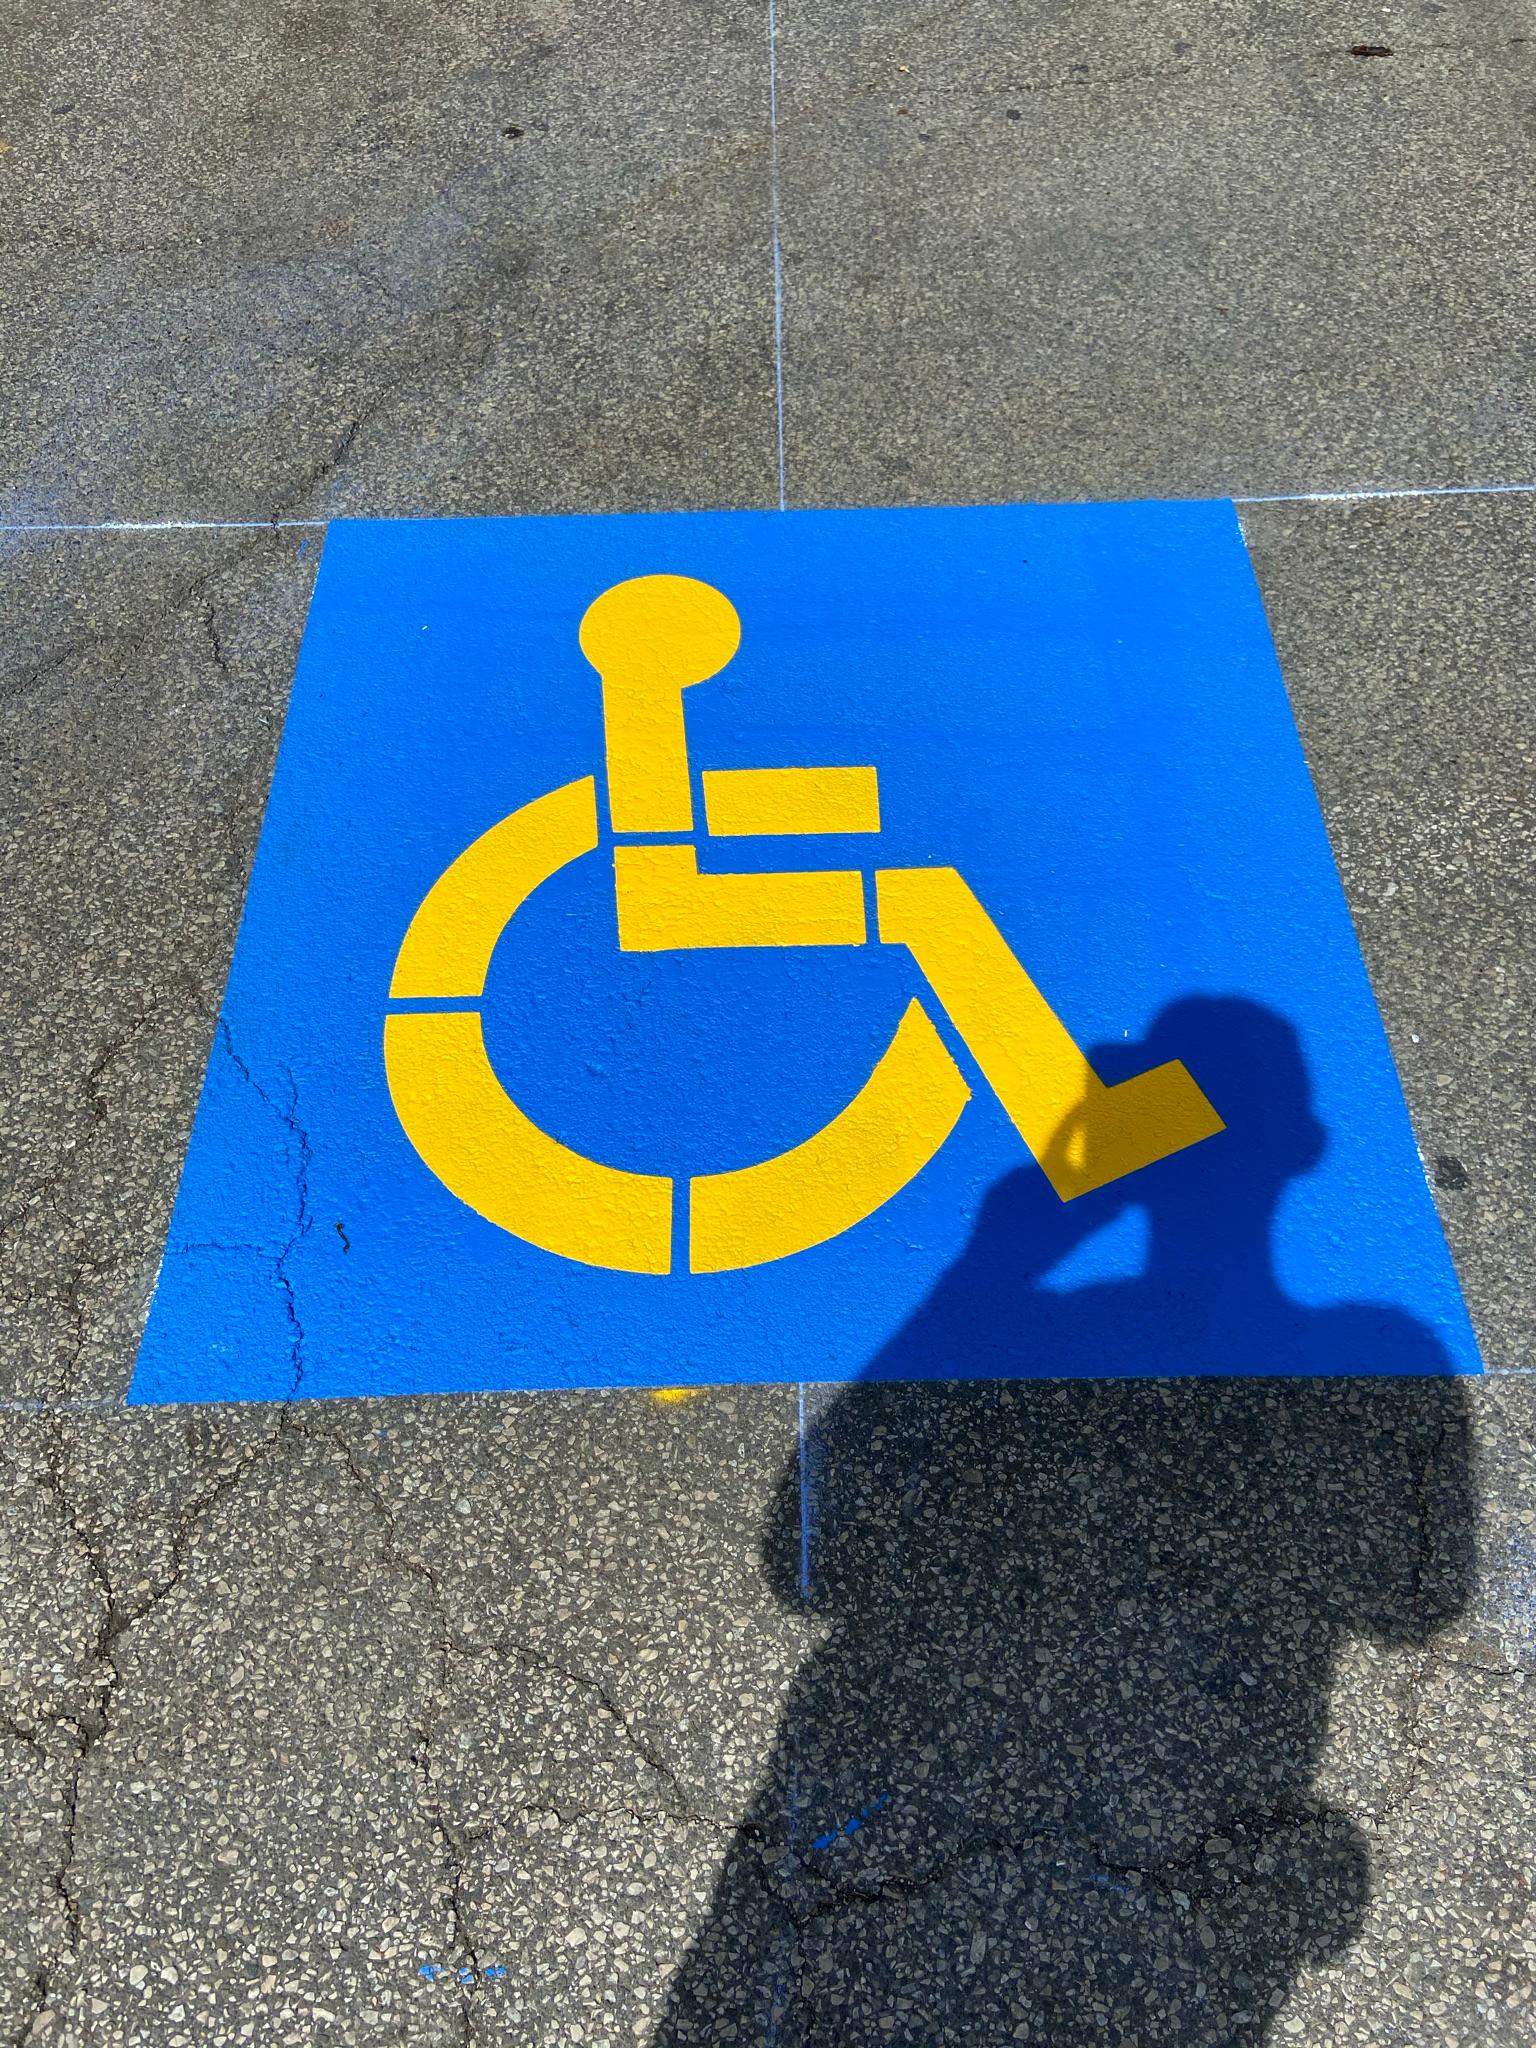 ADA Parking Compliance Cleveland OH